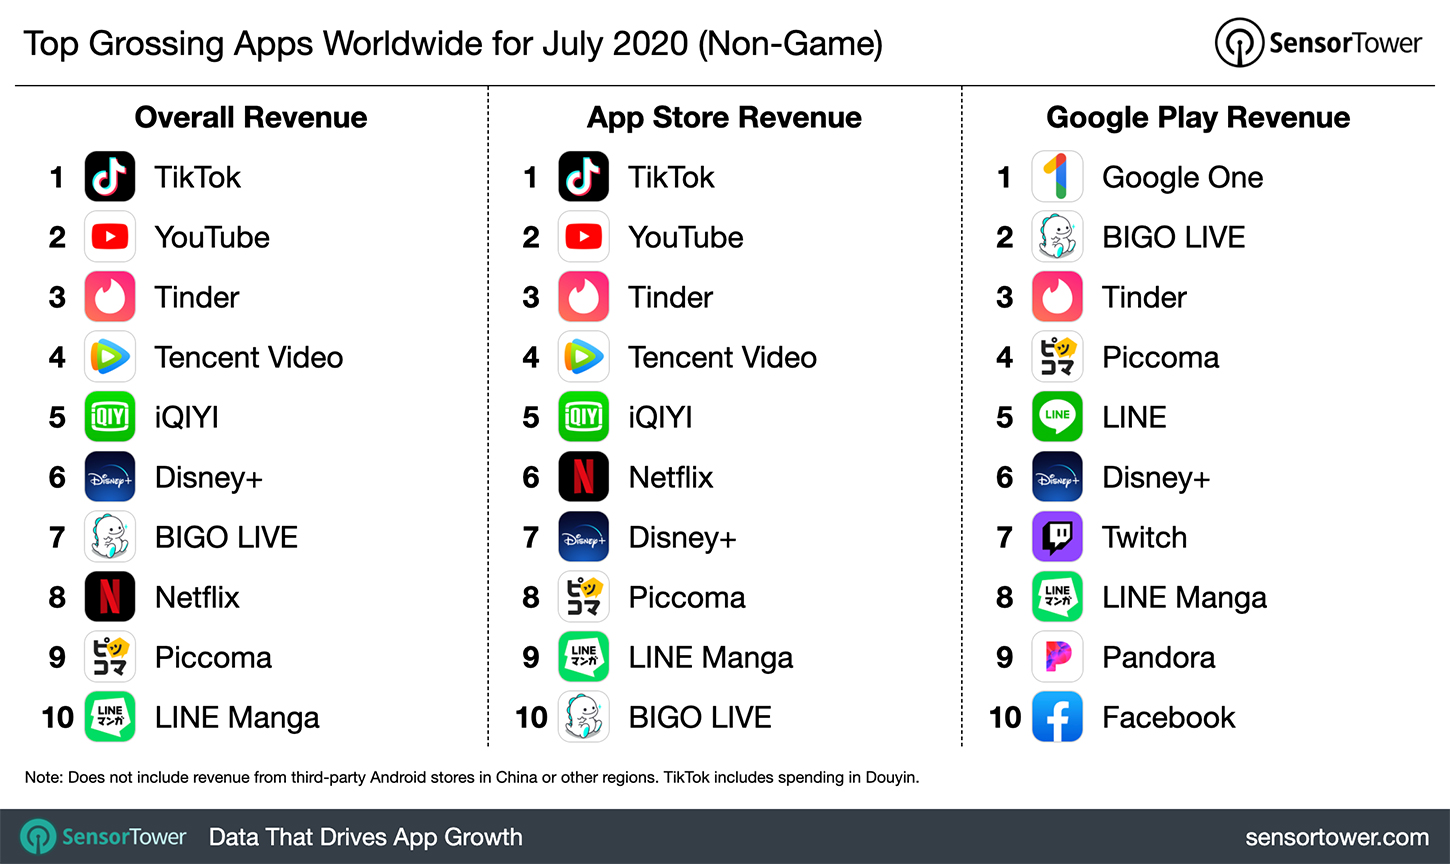 “Top Grossing Apps Worldwide for July 2020